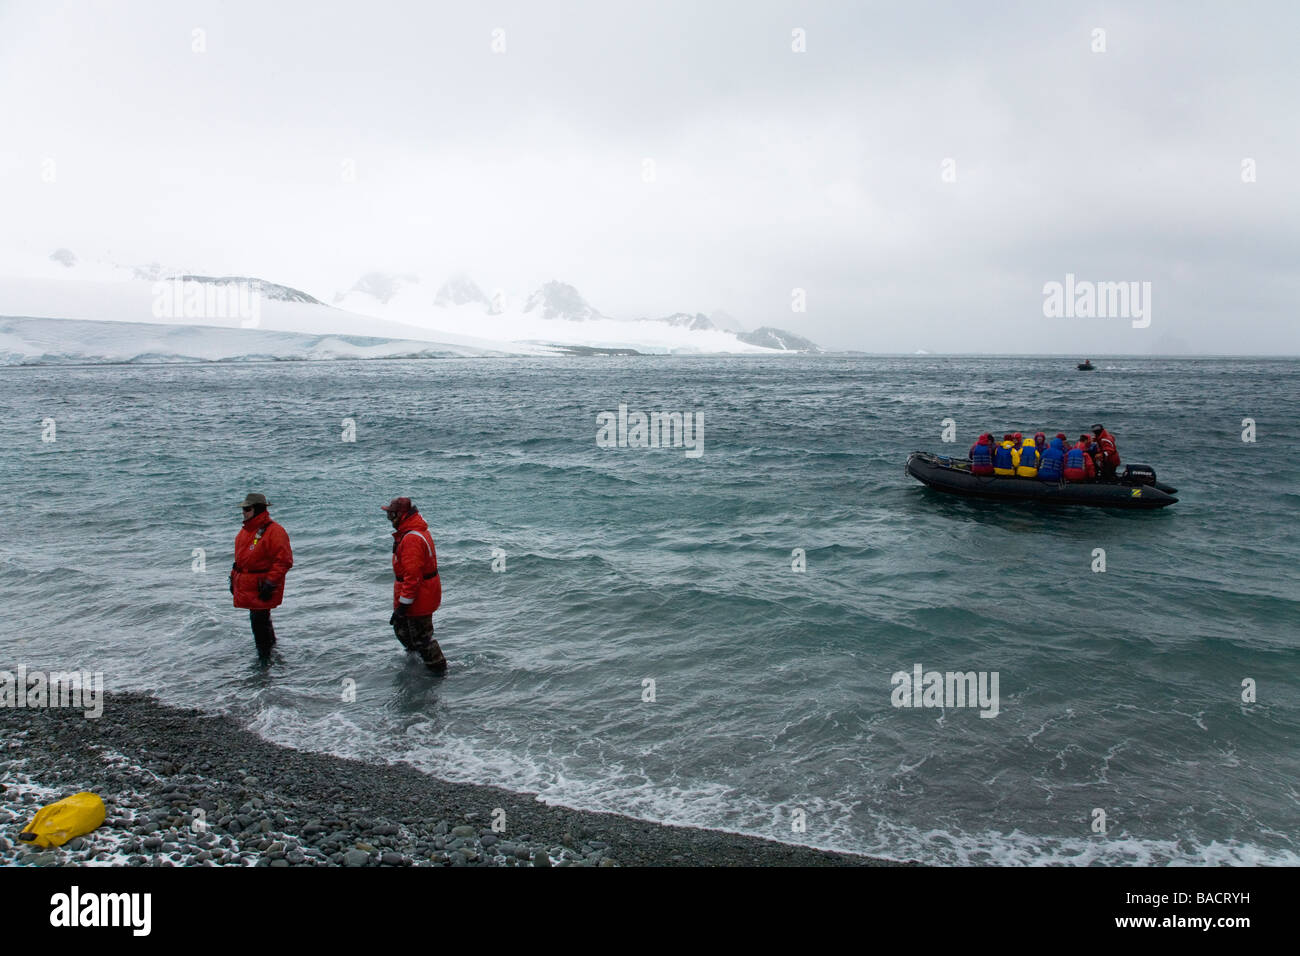 Zodiacs take expedition tourists off Orcadas Argentinian research base Laurie Island South Orkneys Antarctica Stock Photo